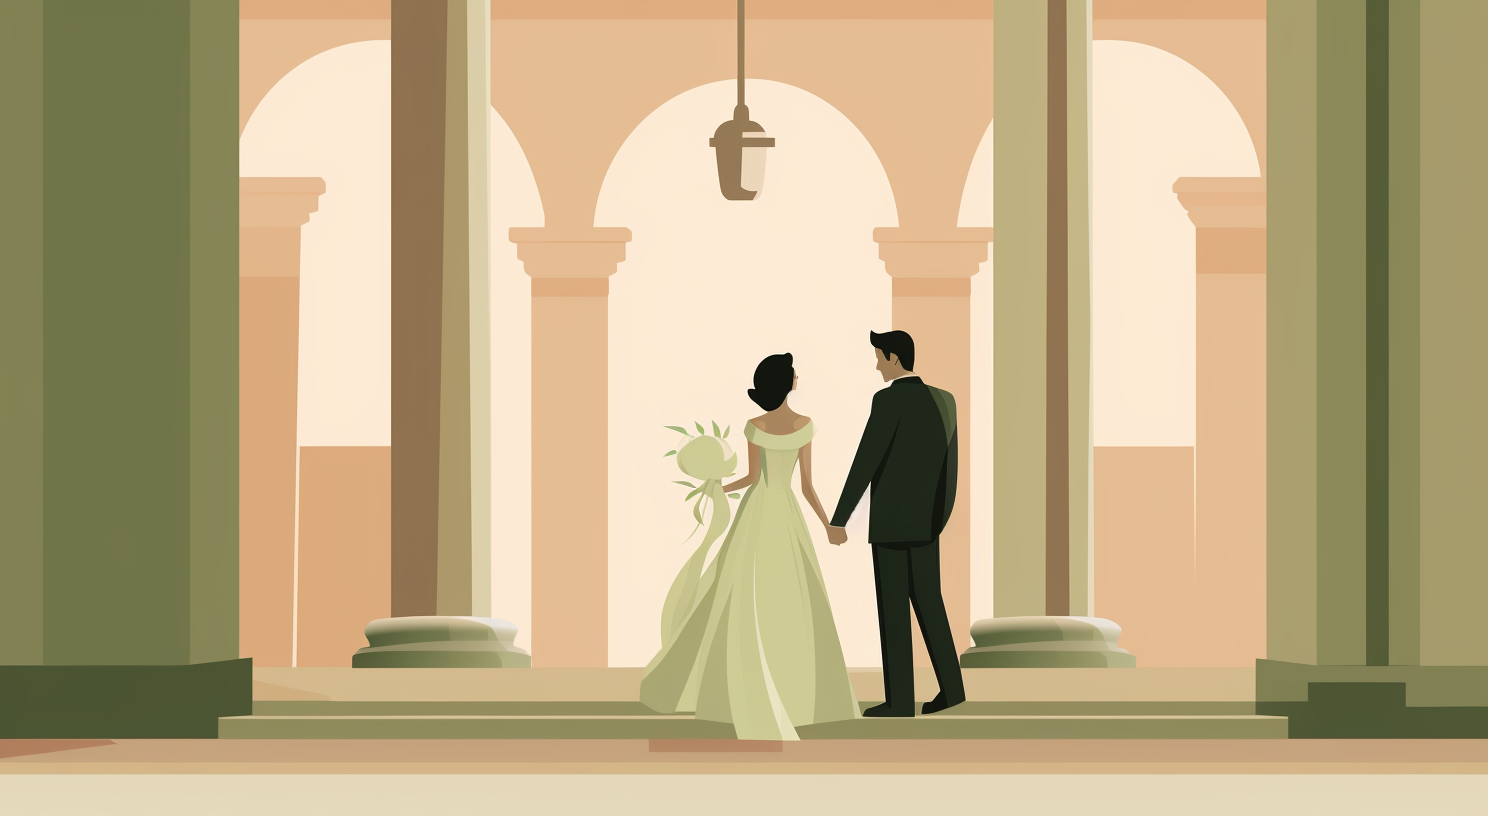 A bride and groom stand inside a courthouse.